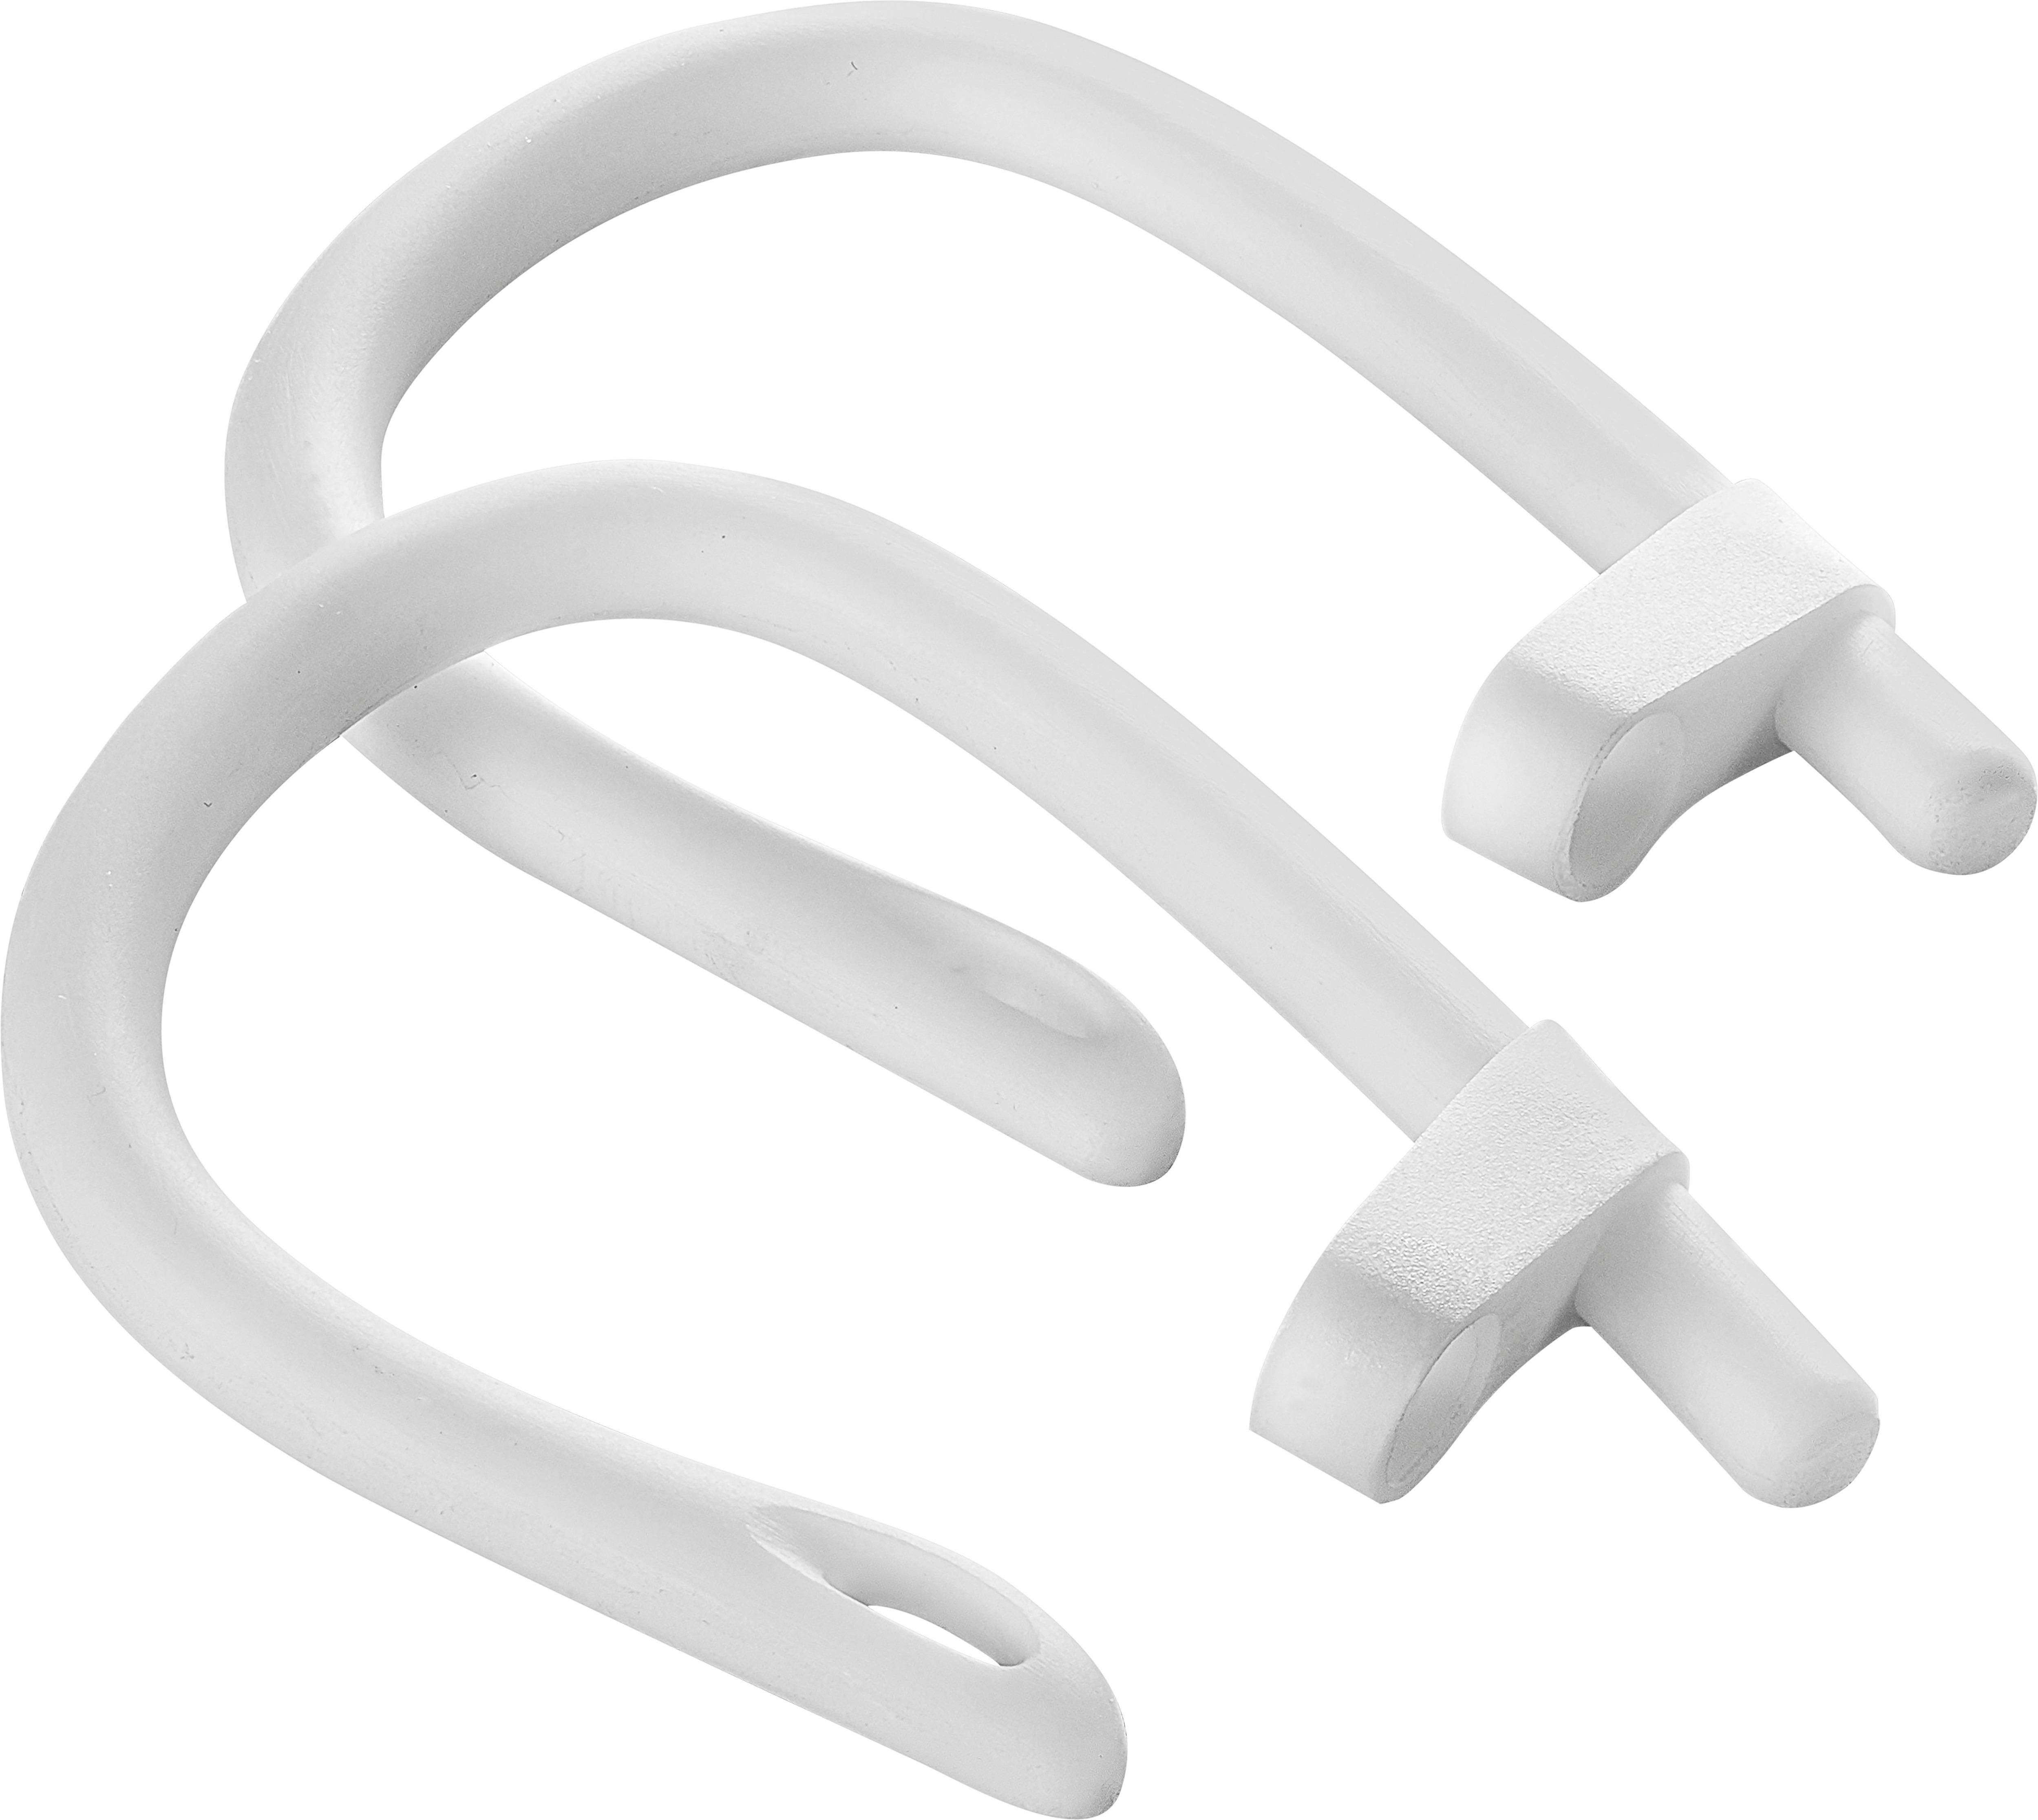 SaharaCase Silicone Accessories Kit for Apple AirPods 3 (3rd Generation)  White HP00100 - Best Buy